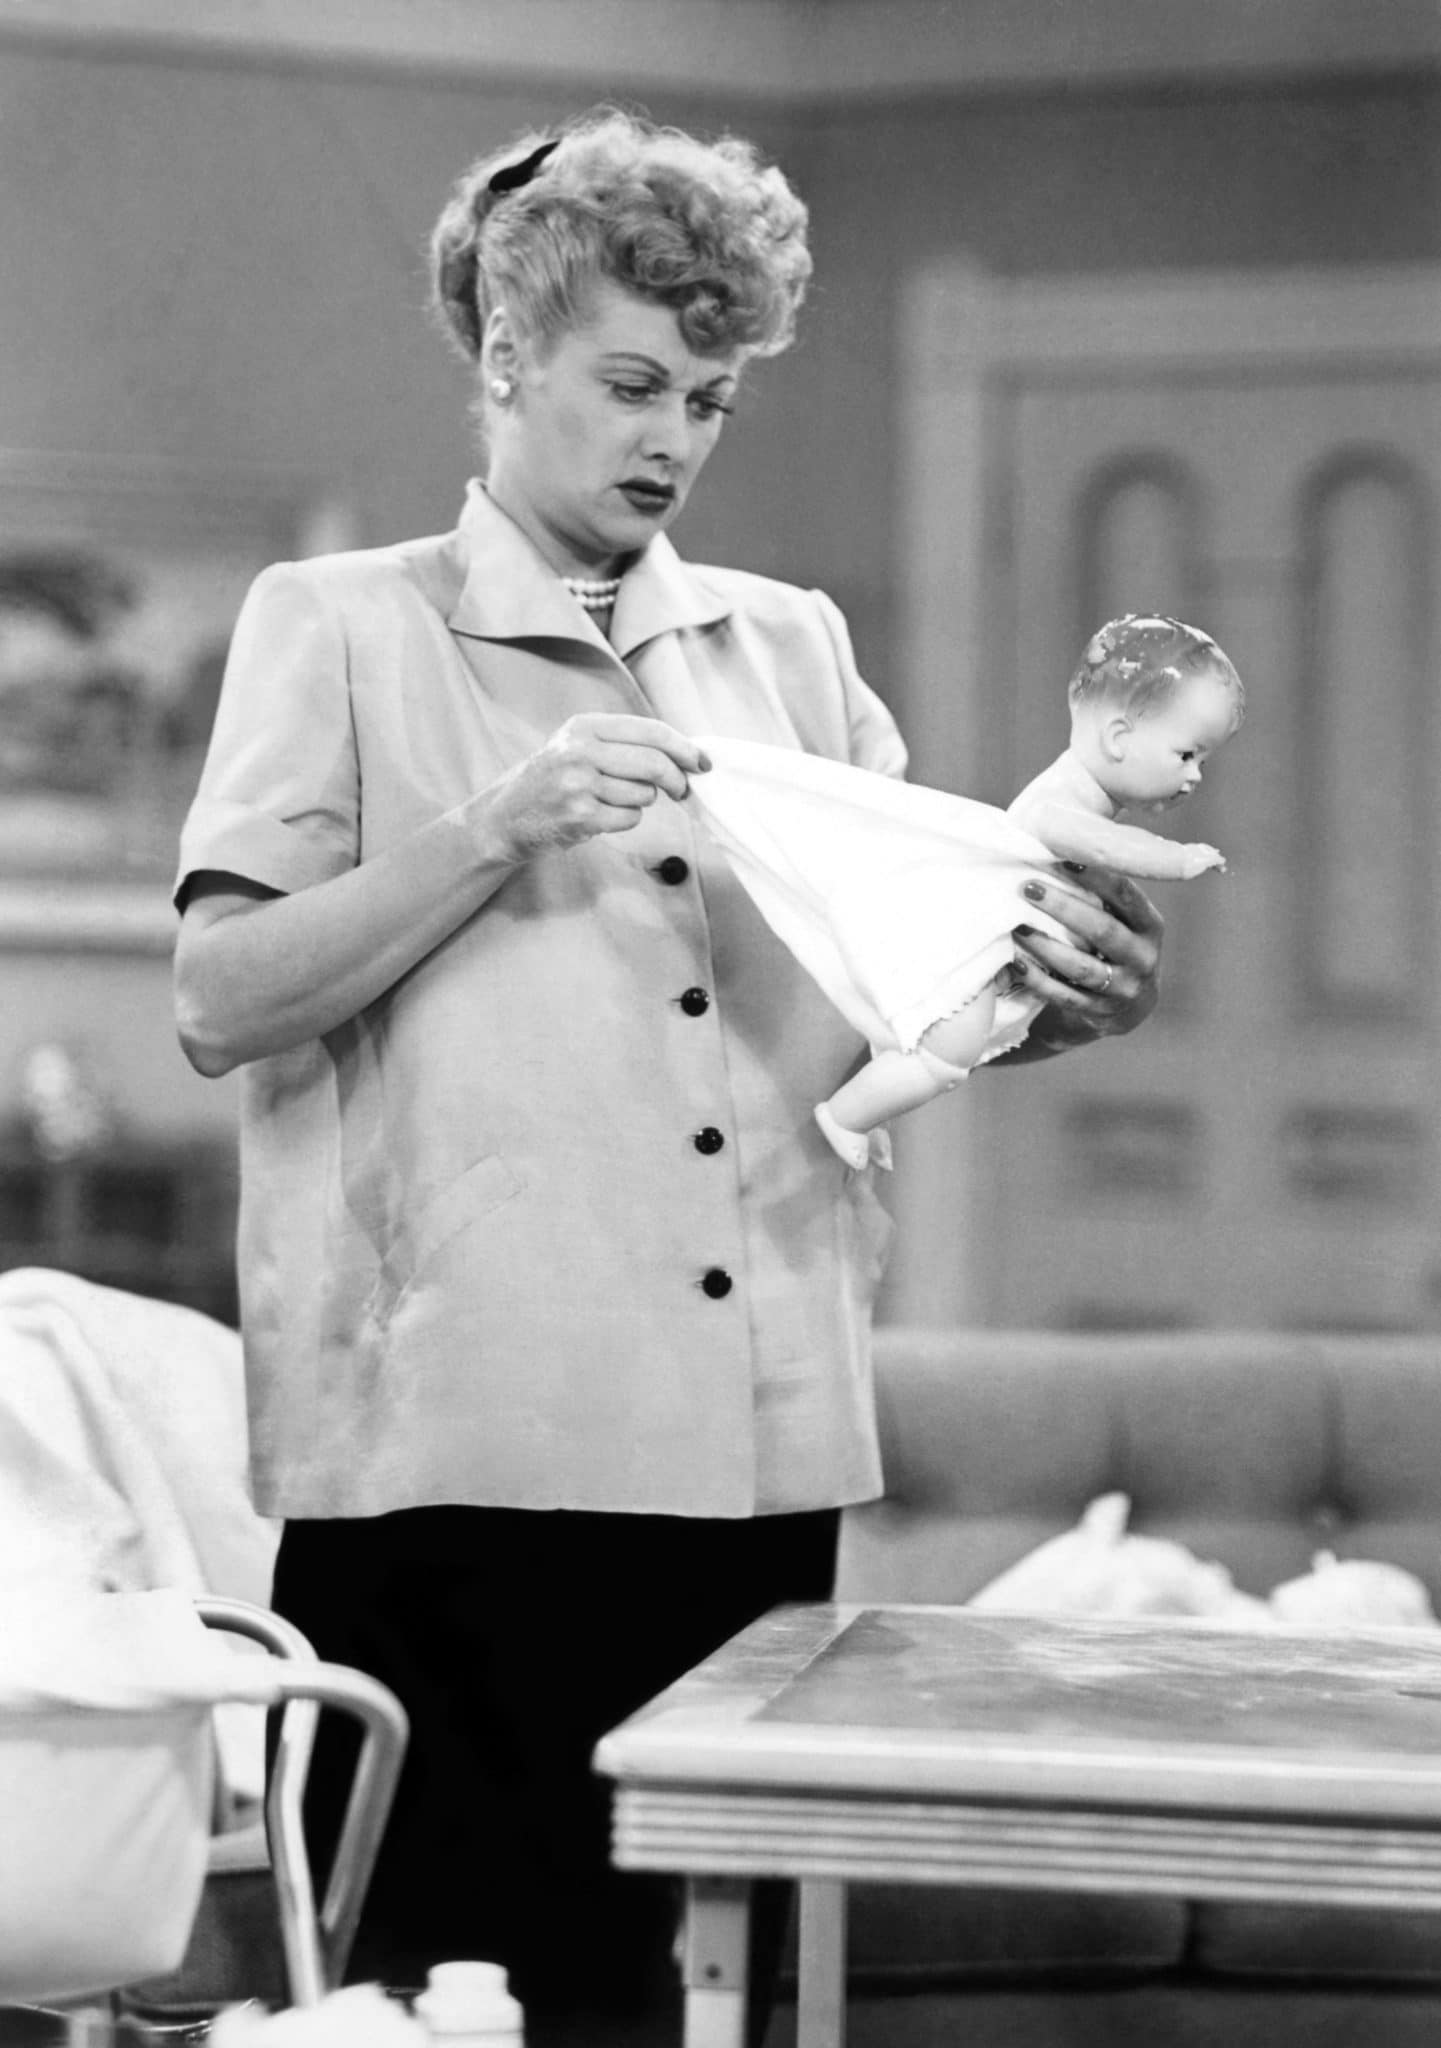 This 'I Love Lucy' Photo CAN'T Be Unseen, Plus Other Crazy 'Lucy' Facts